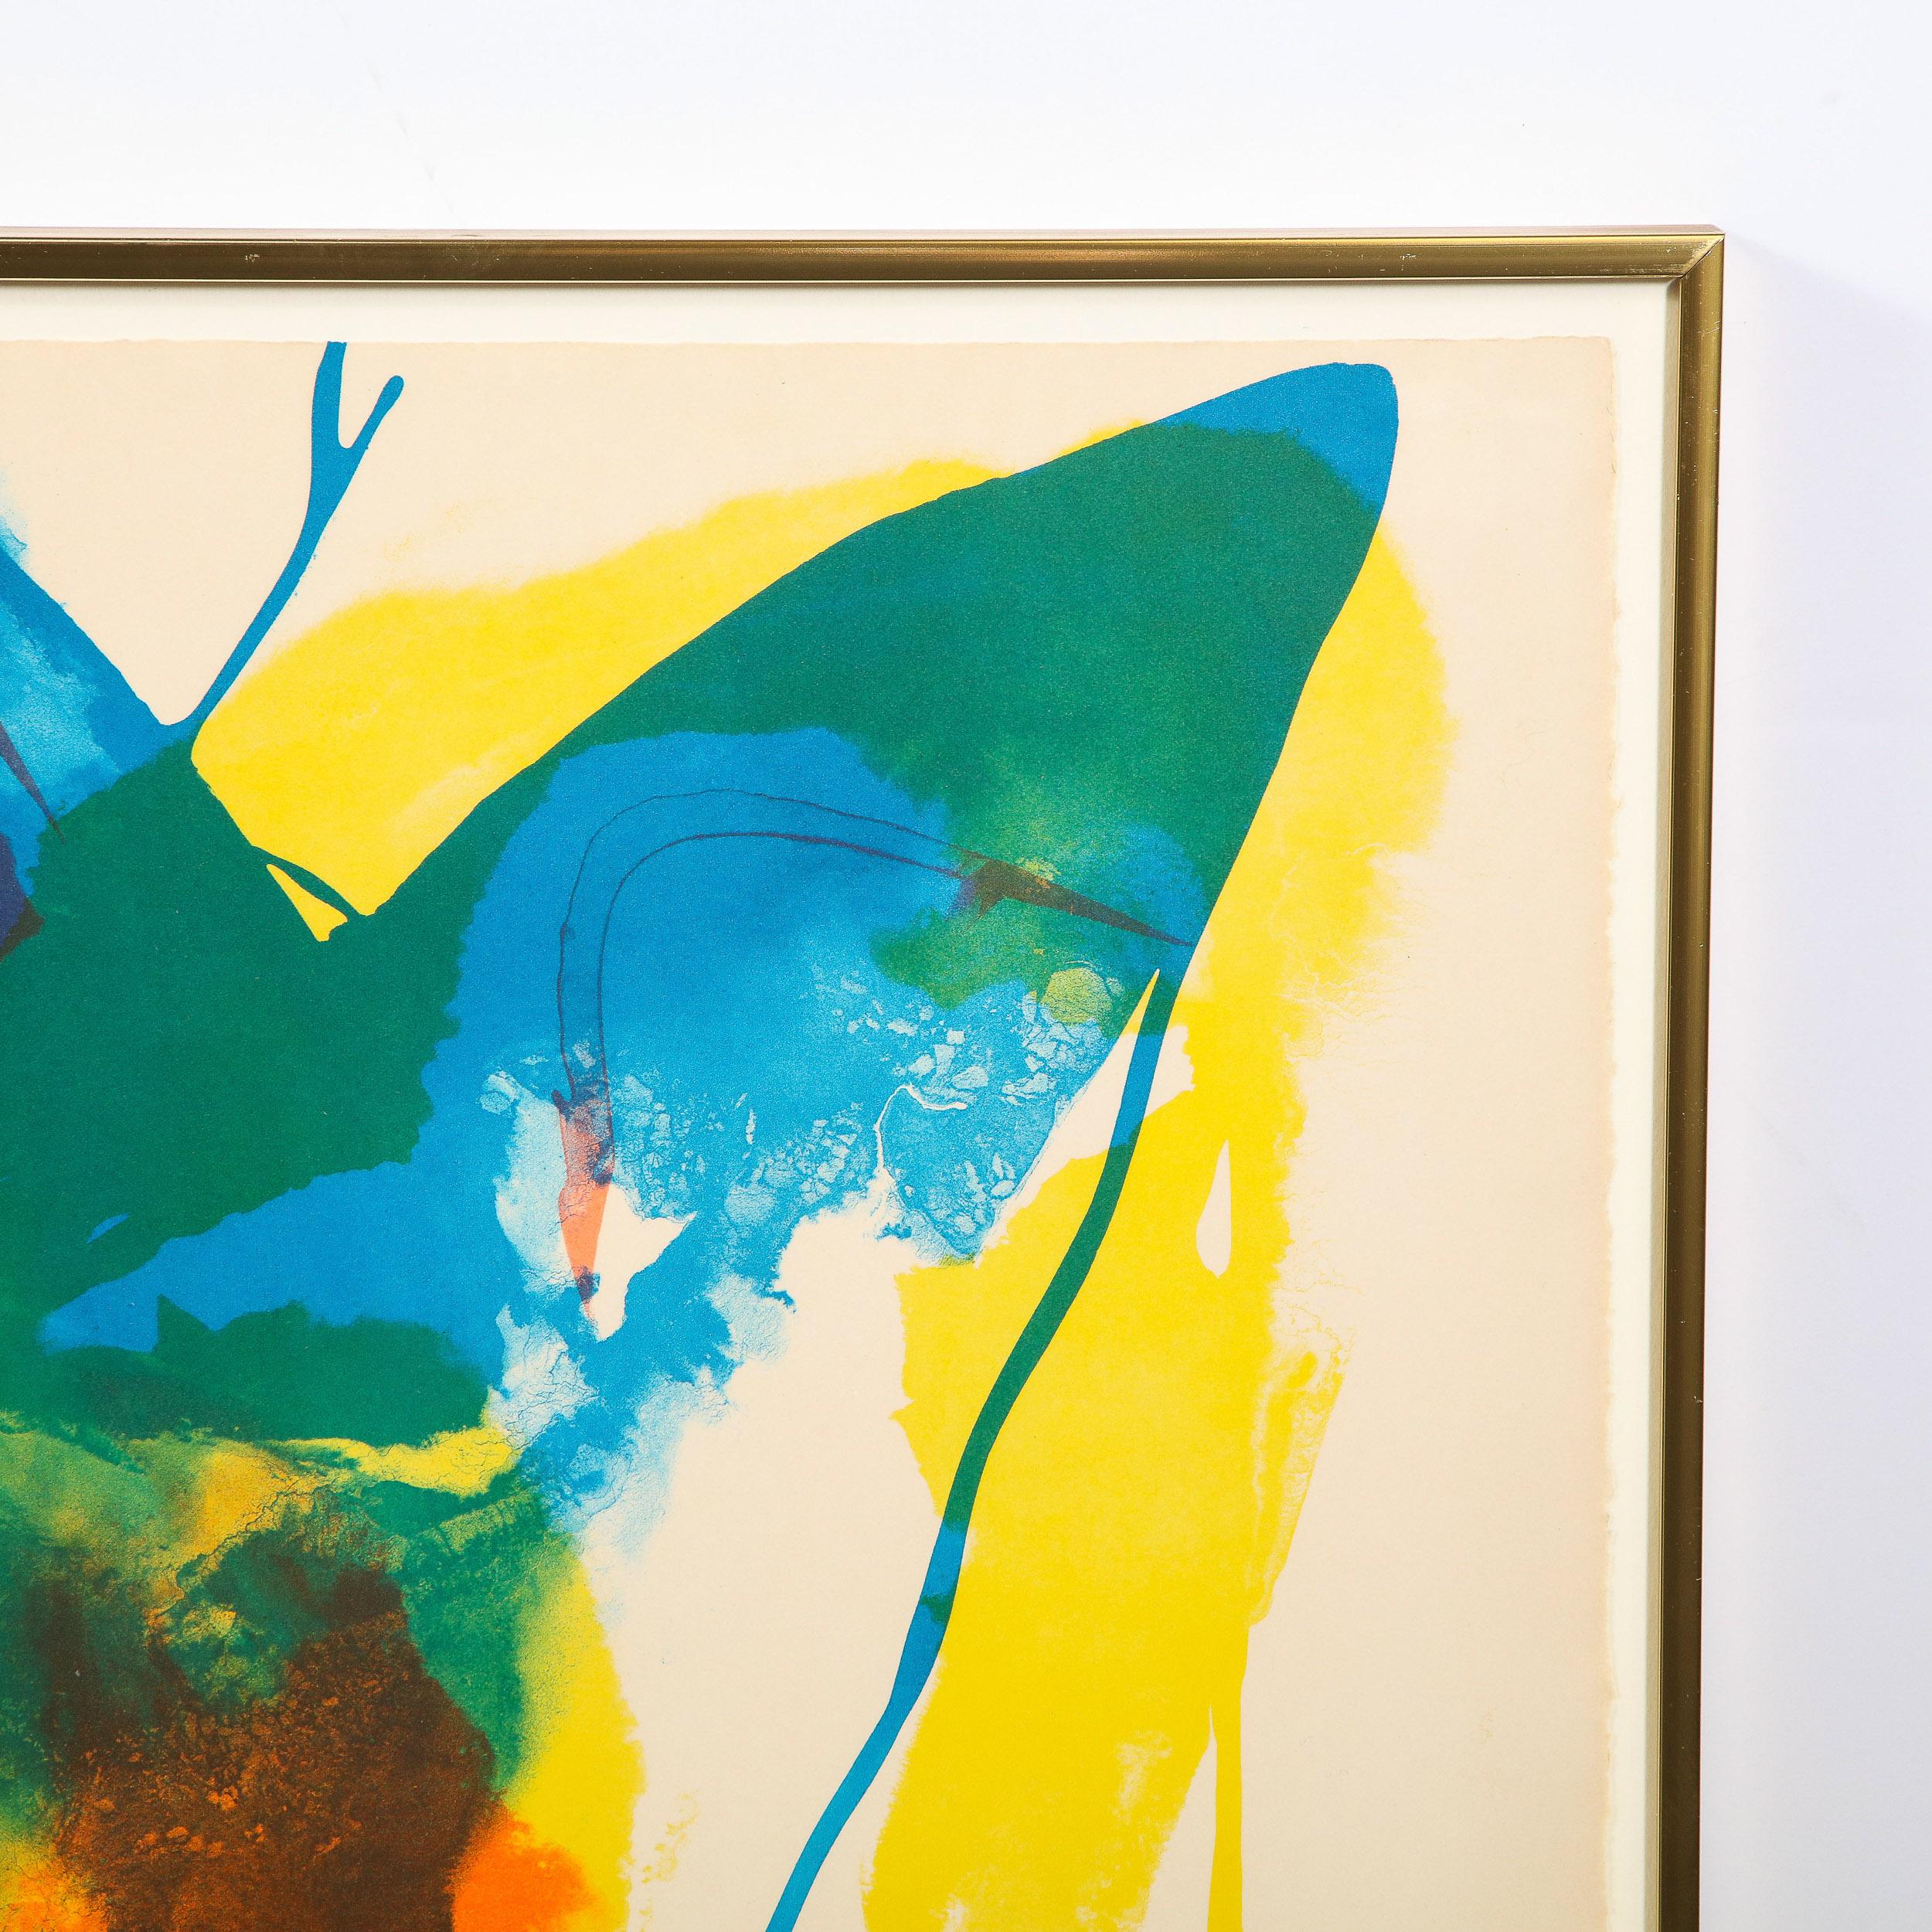 This stunning lithograph was realized by the esteemed 20th Century artist Paul Jenkins circa 1965. It offers an energetic and ebullient abstract composition in tones of tangerine, aquamarine and lemon rendered in nearly liquid strokes that appear to